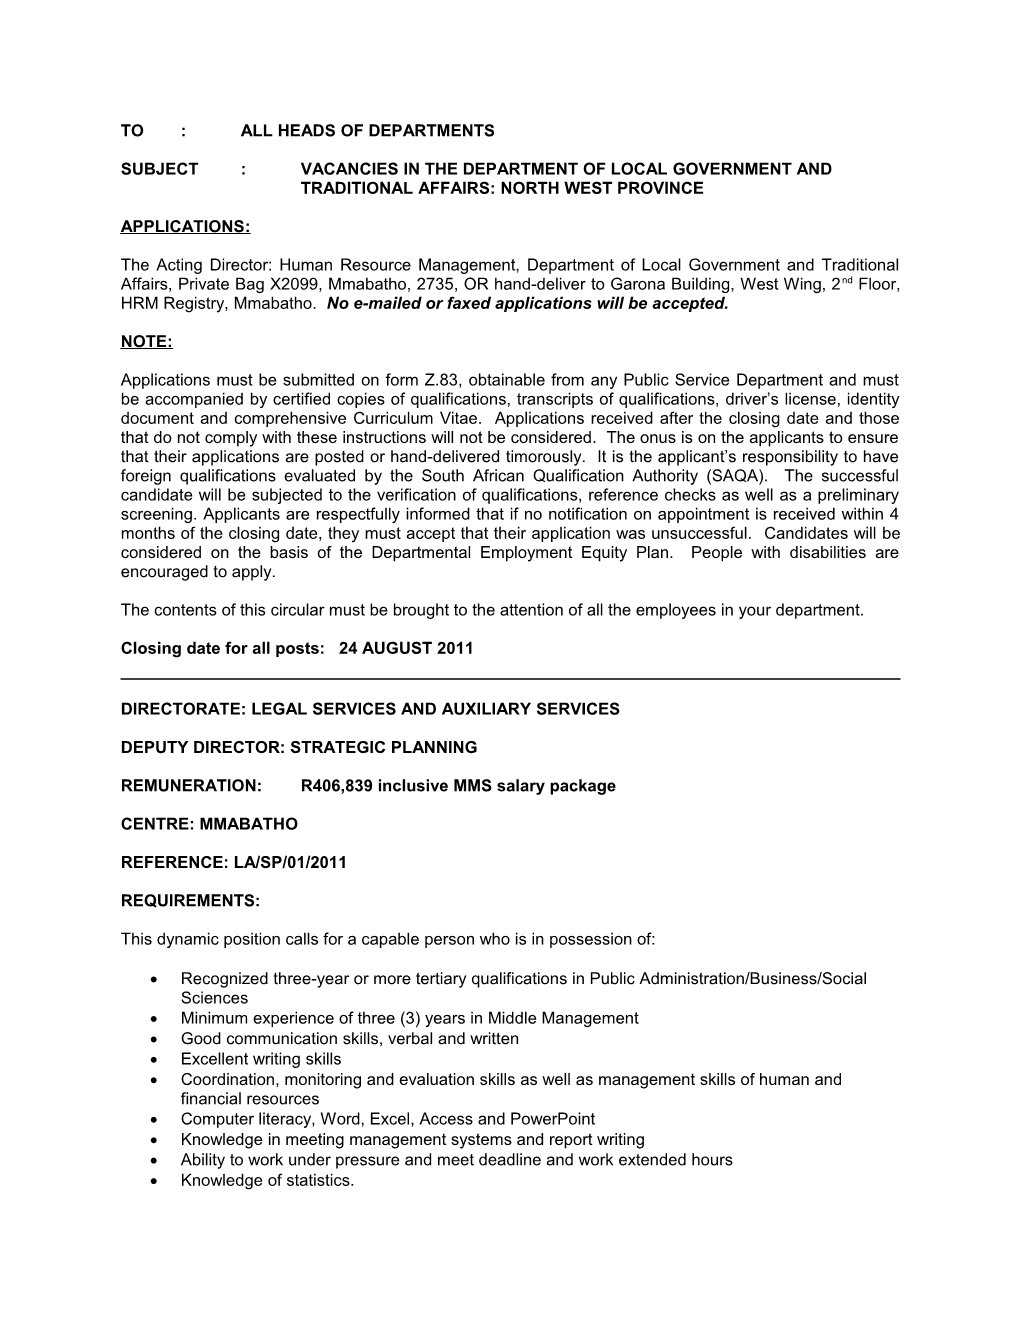 Subject:Vacancies in the Department of Local Government And